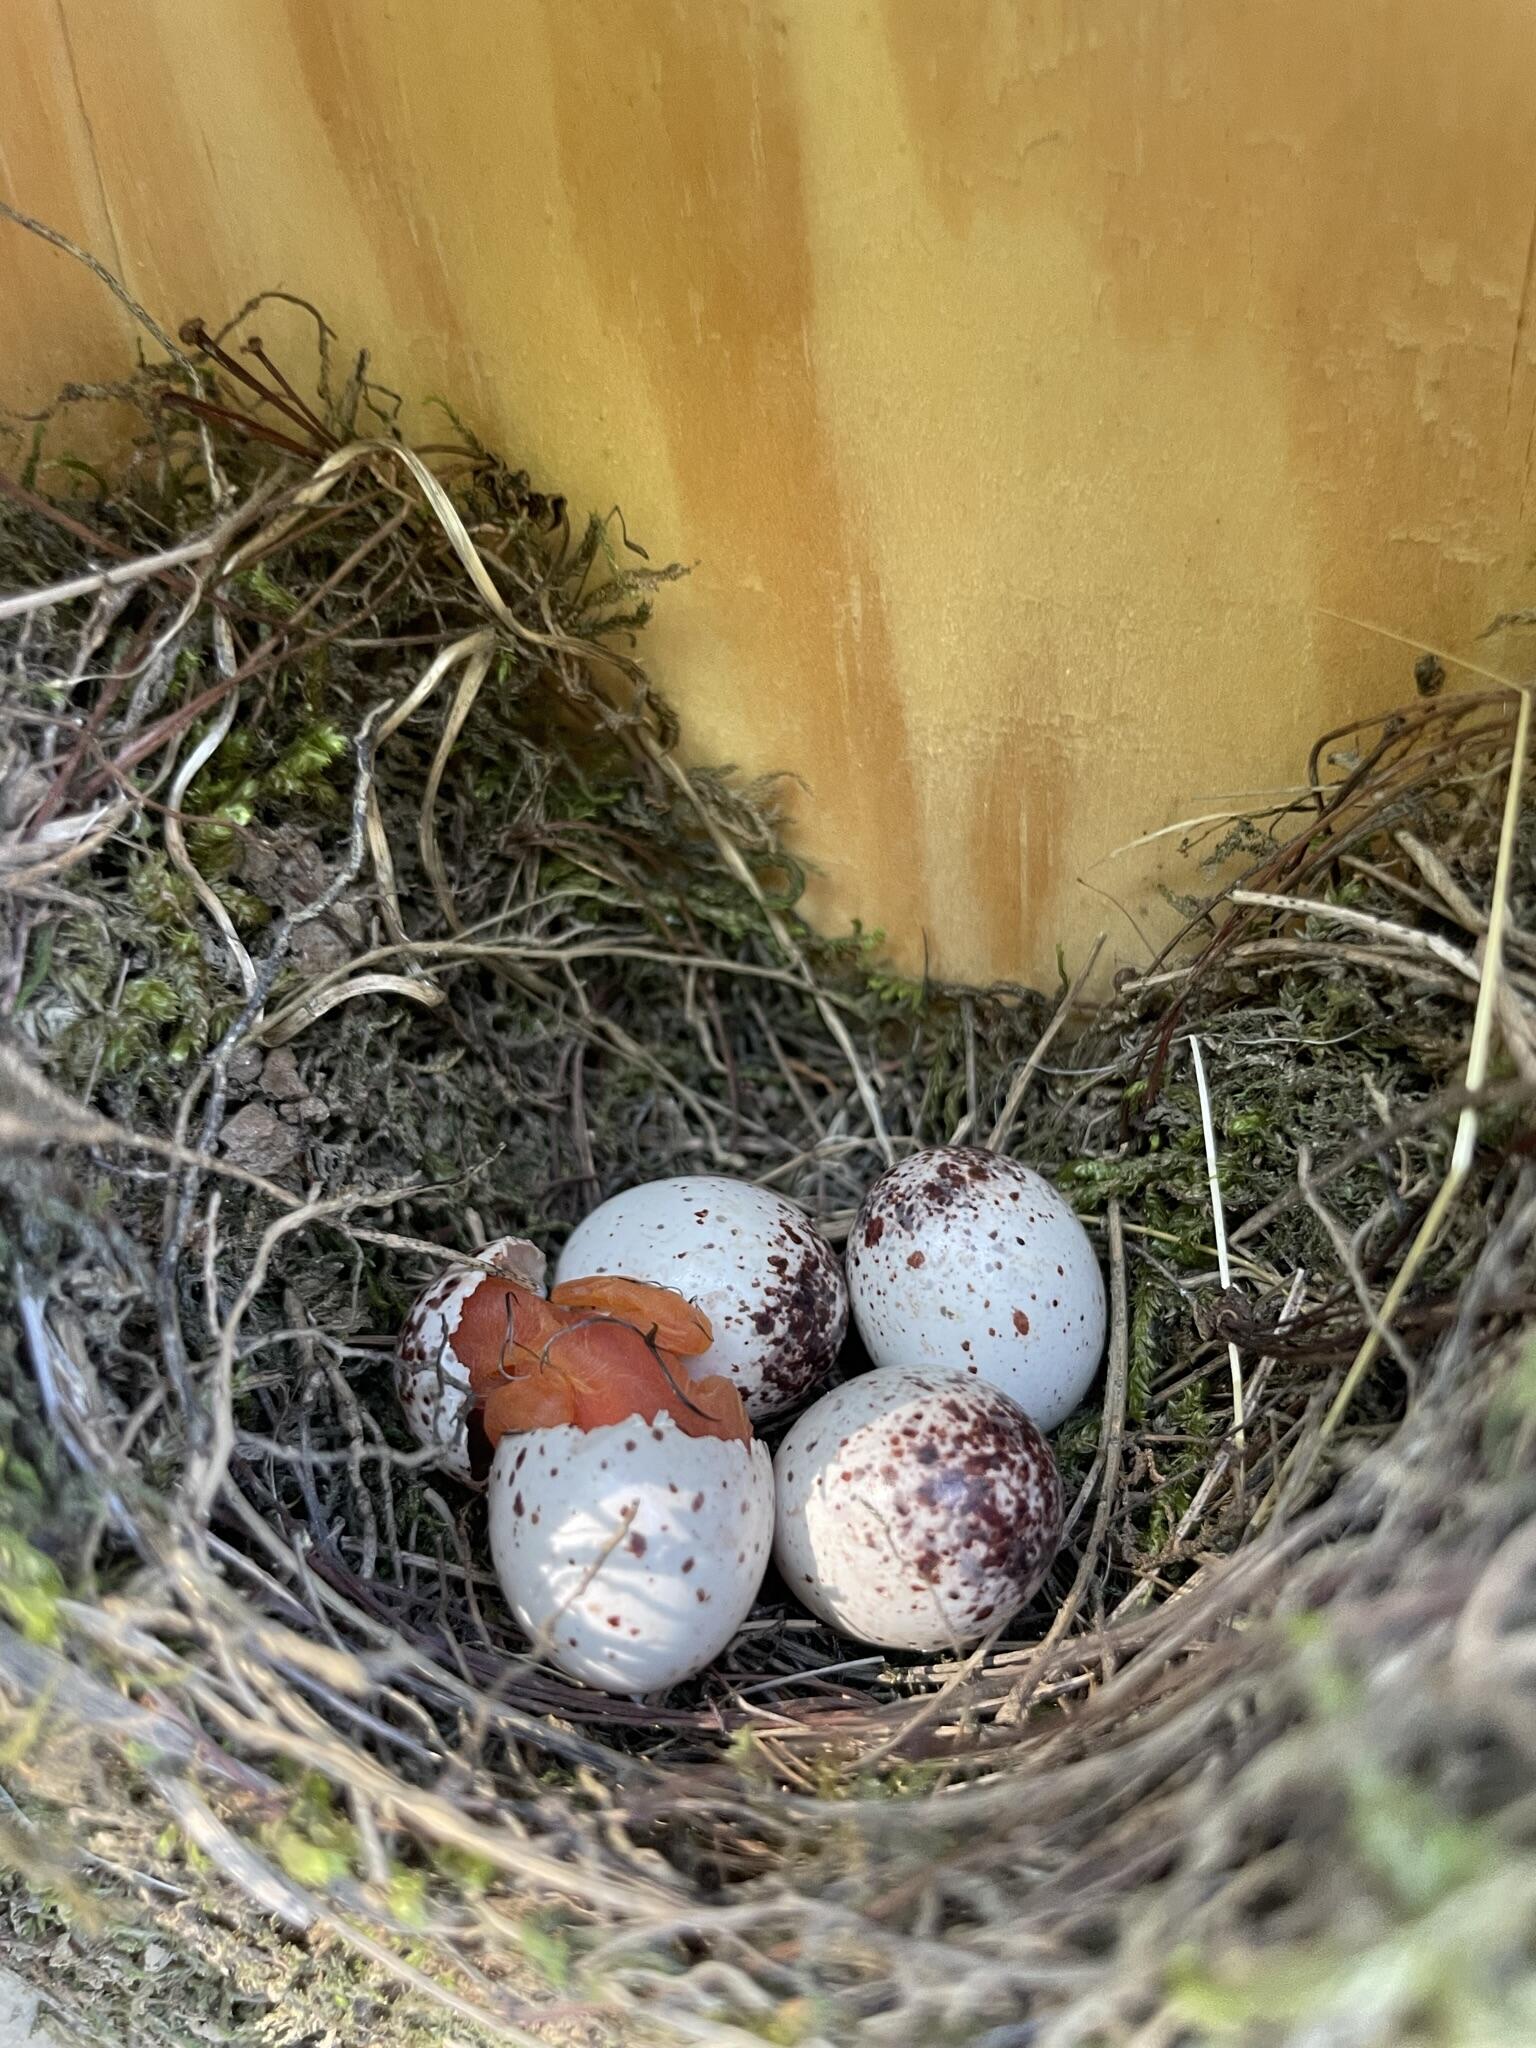 A photo of a bird hatching from a egg in a nest. There are three other eggs next to the hatching egg. 